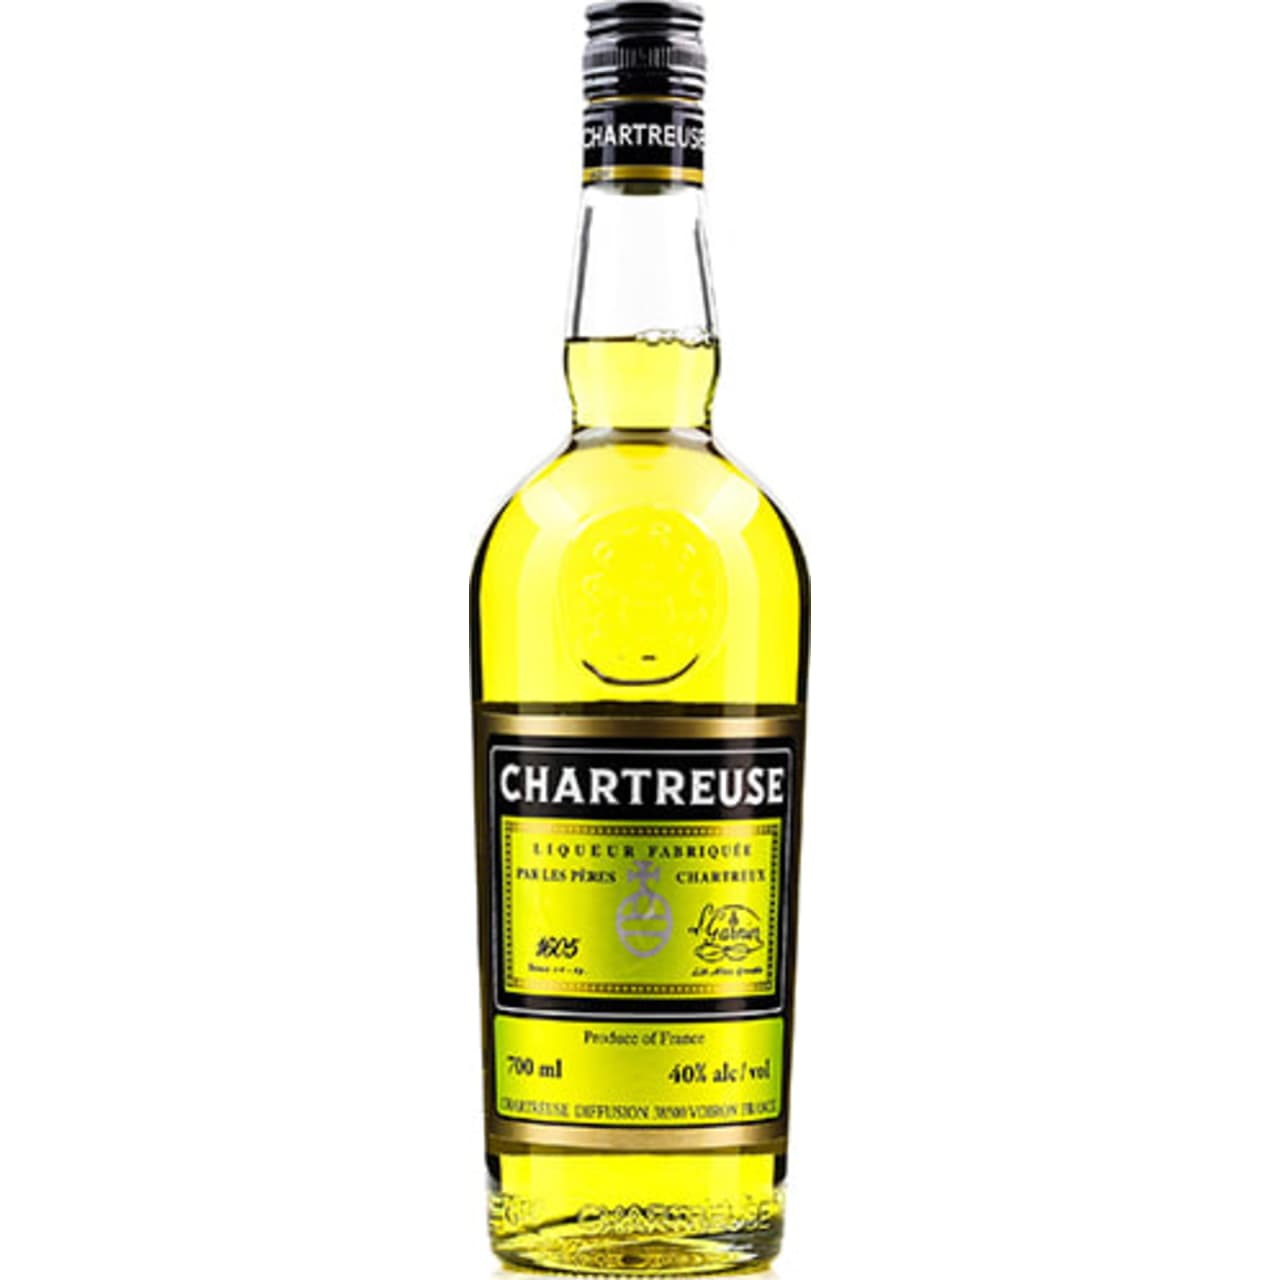 Chartreuse Yellow has significantly less alcohol and is a little sweeter than the green "original".